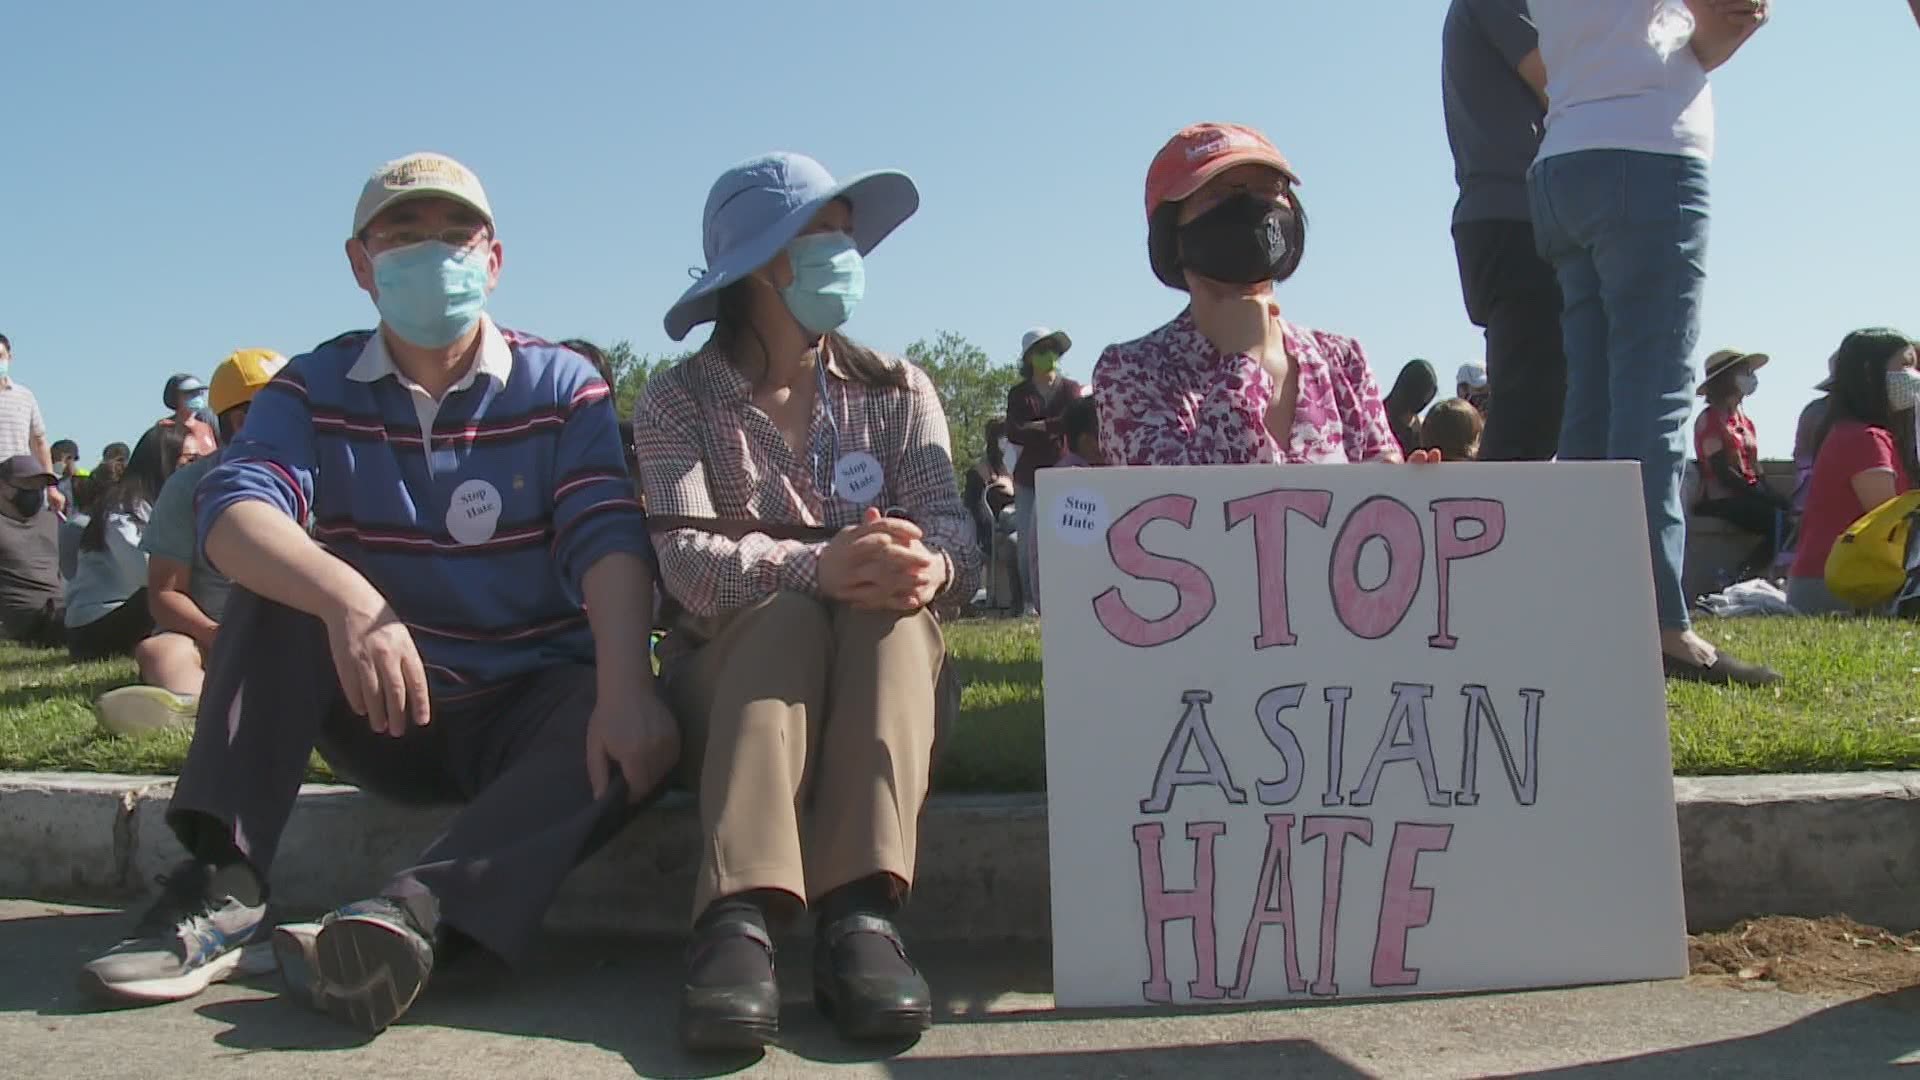 A rally was held in the city to protest Asian Hate after the recent attacks on the Asian community.